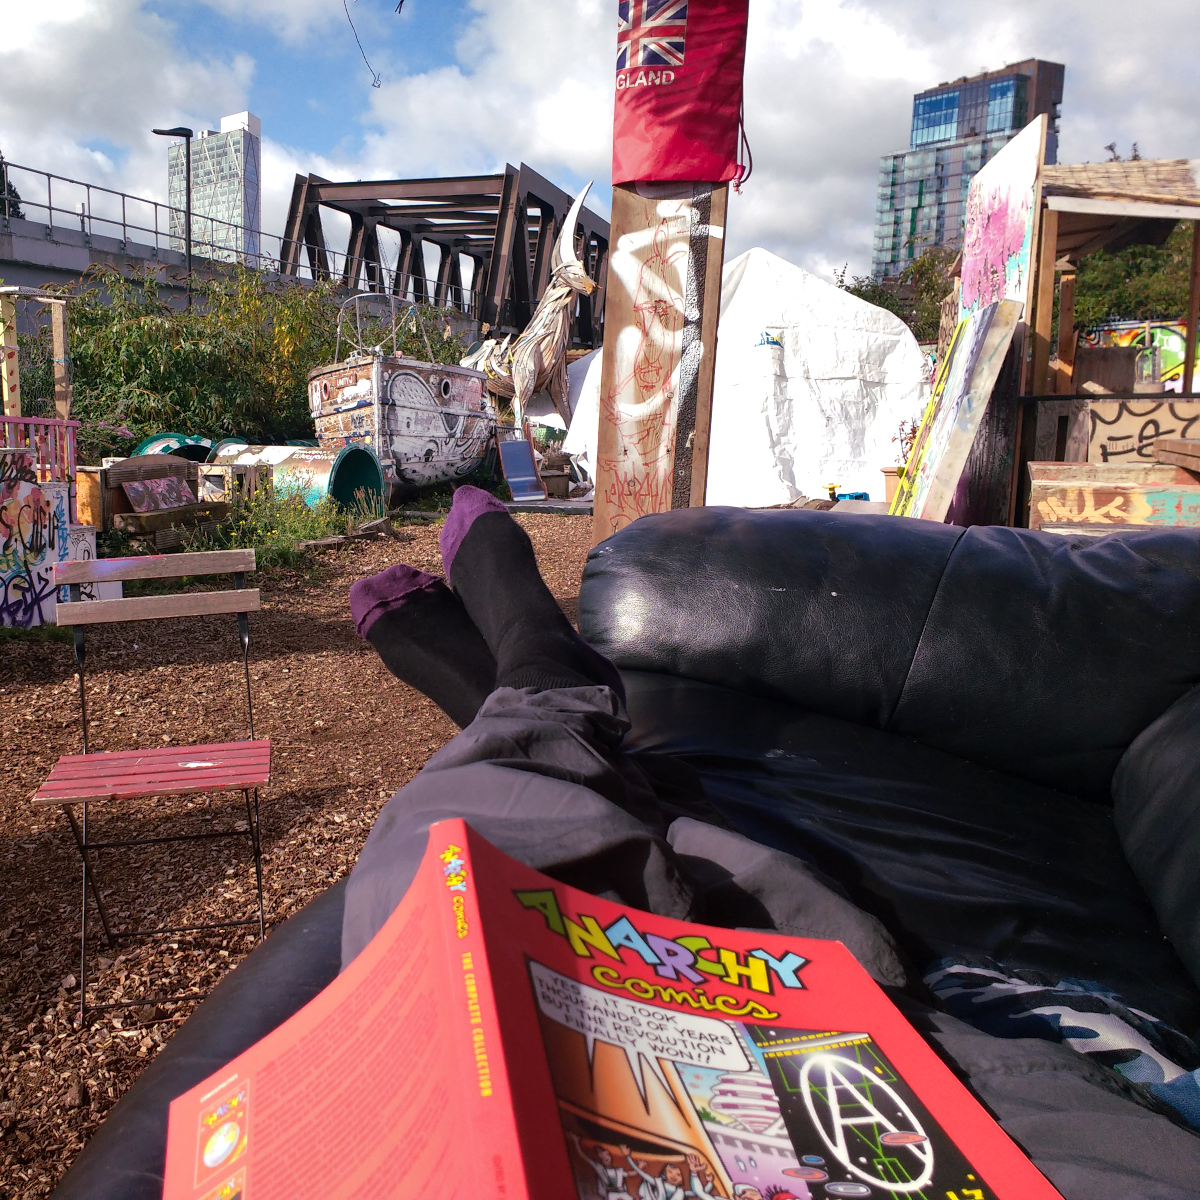 POV photo of a persons legs lying on a sofa outside in some sort of cool punk hacker garden with loads of structures made of wood and graffiti. Tower blocks are in the background. The person is reading Anarchy Comics.